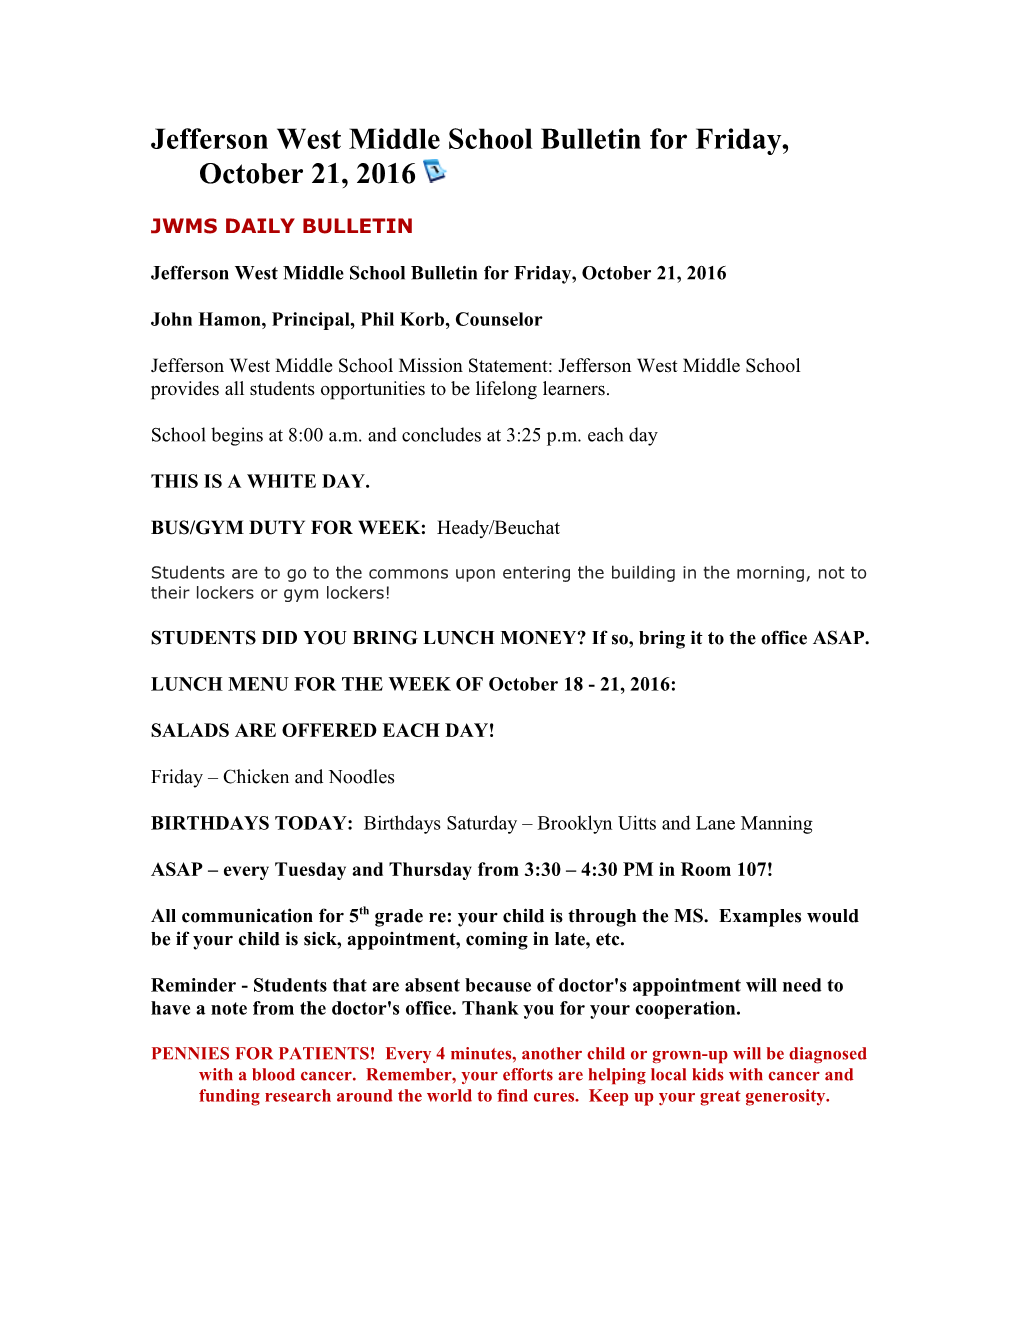 Jwms Daily Bulletin s1